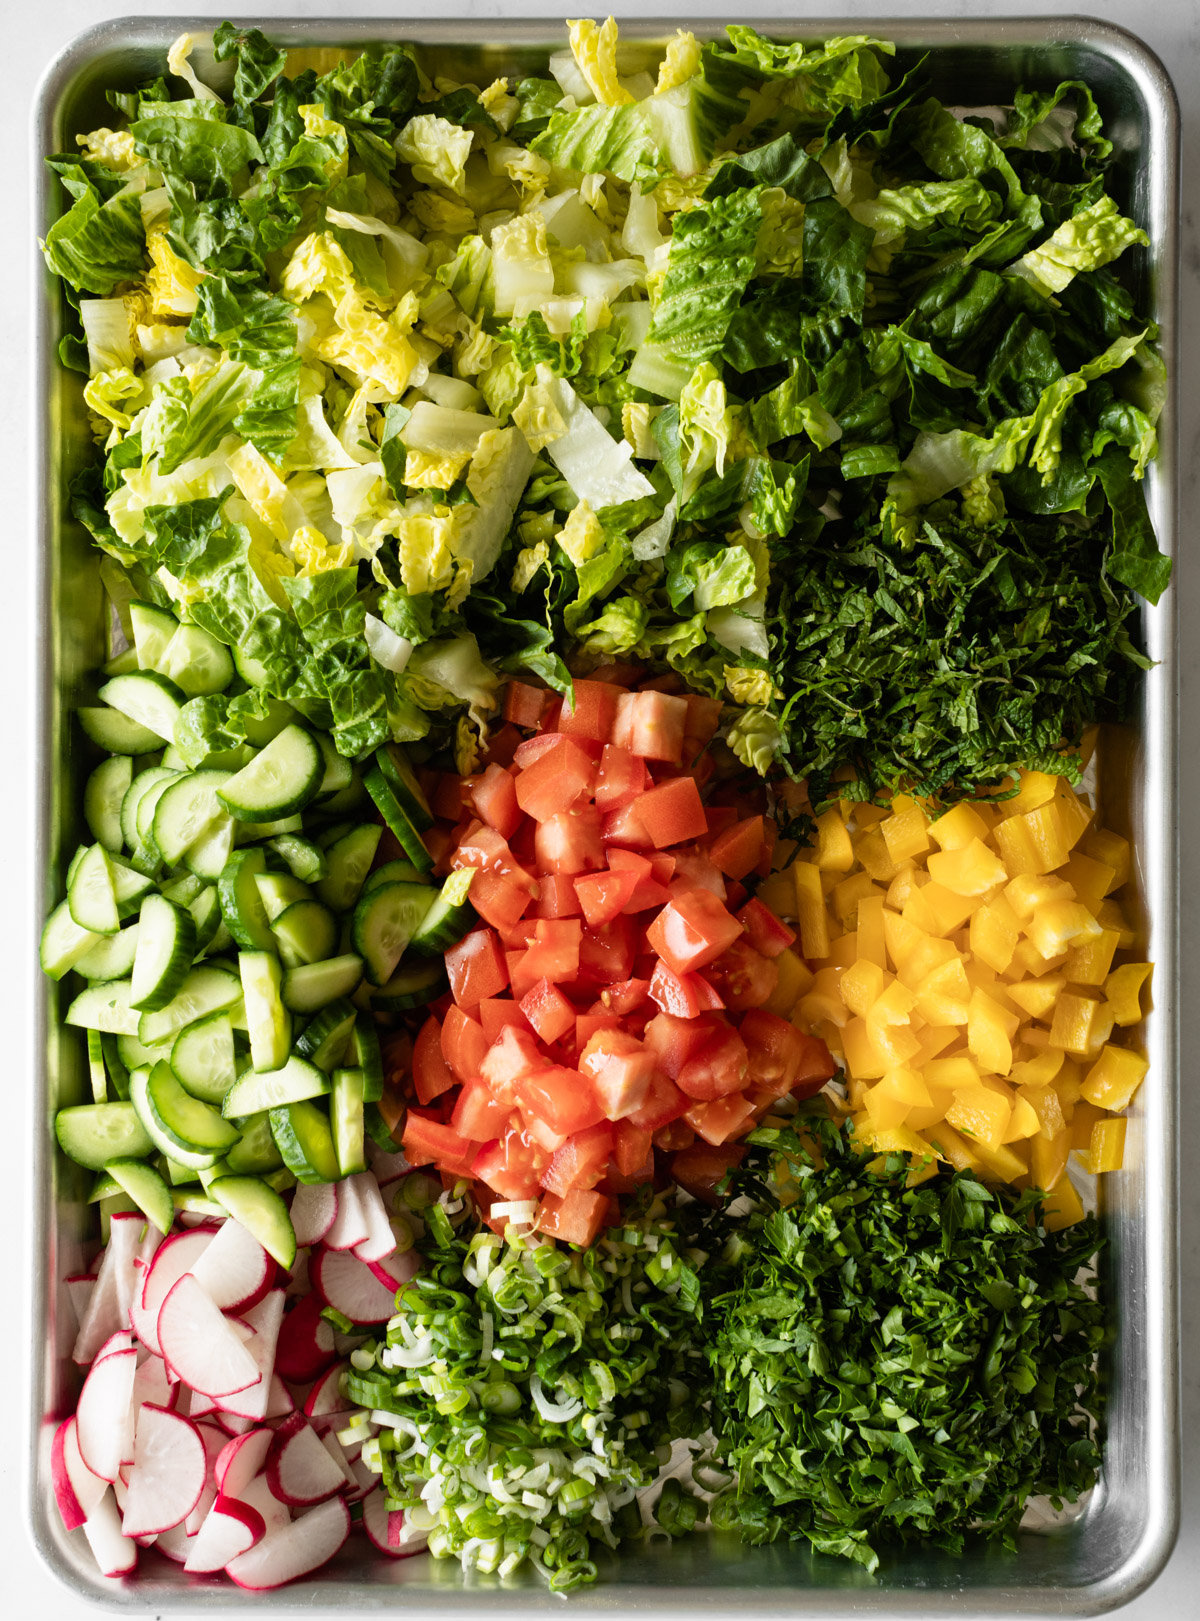 chopped vegetables and herbs in a large tray.